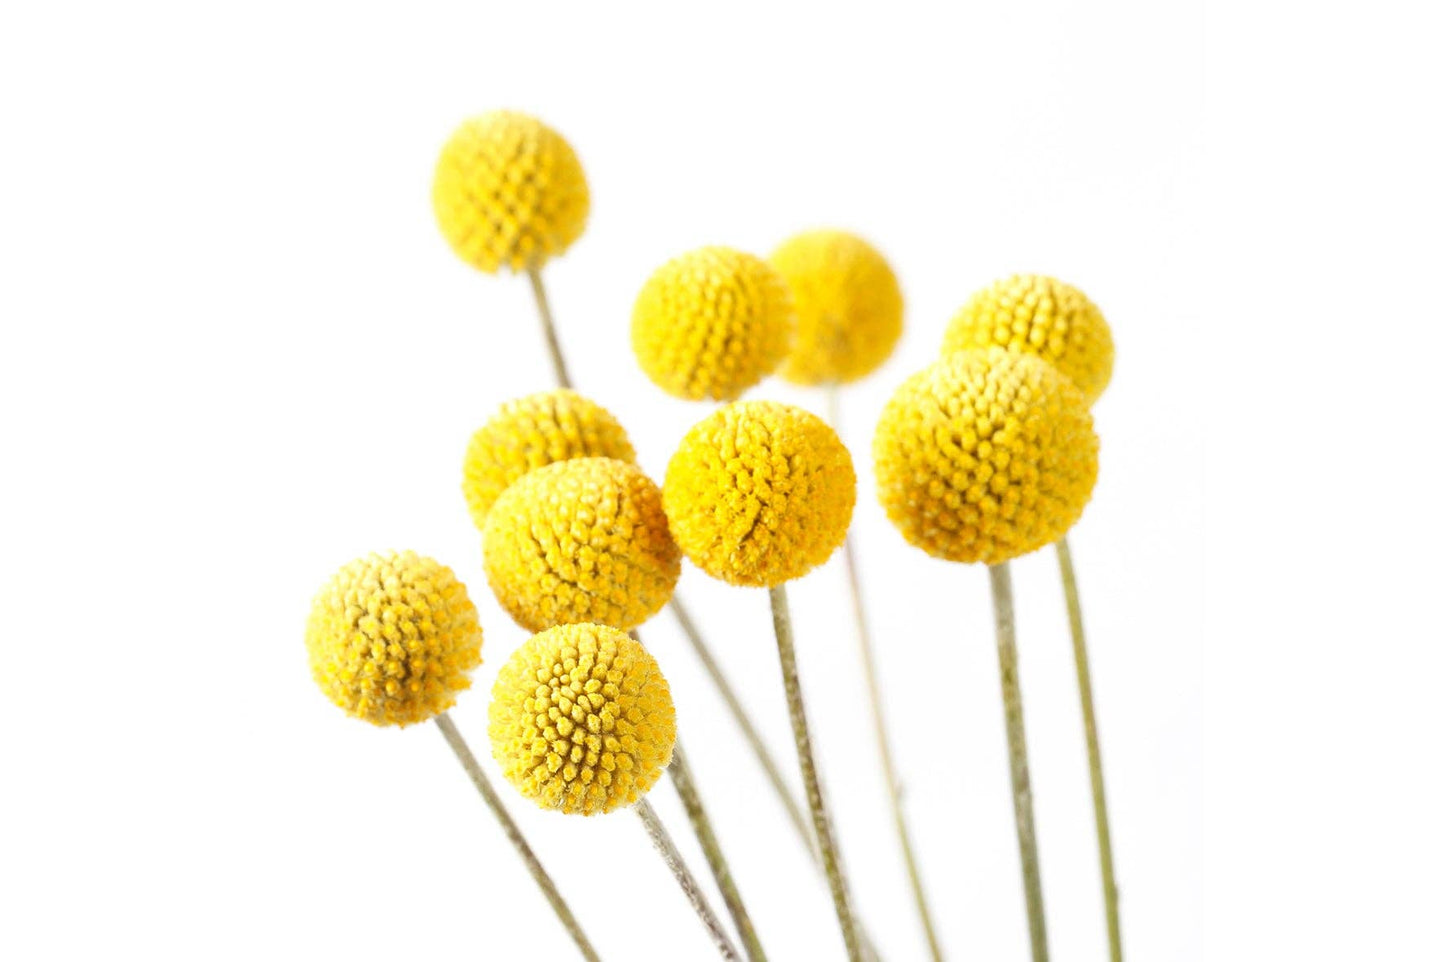 Billy Buttons Grow Kit